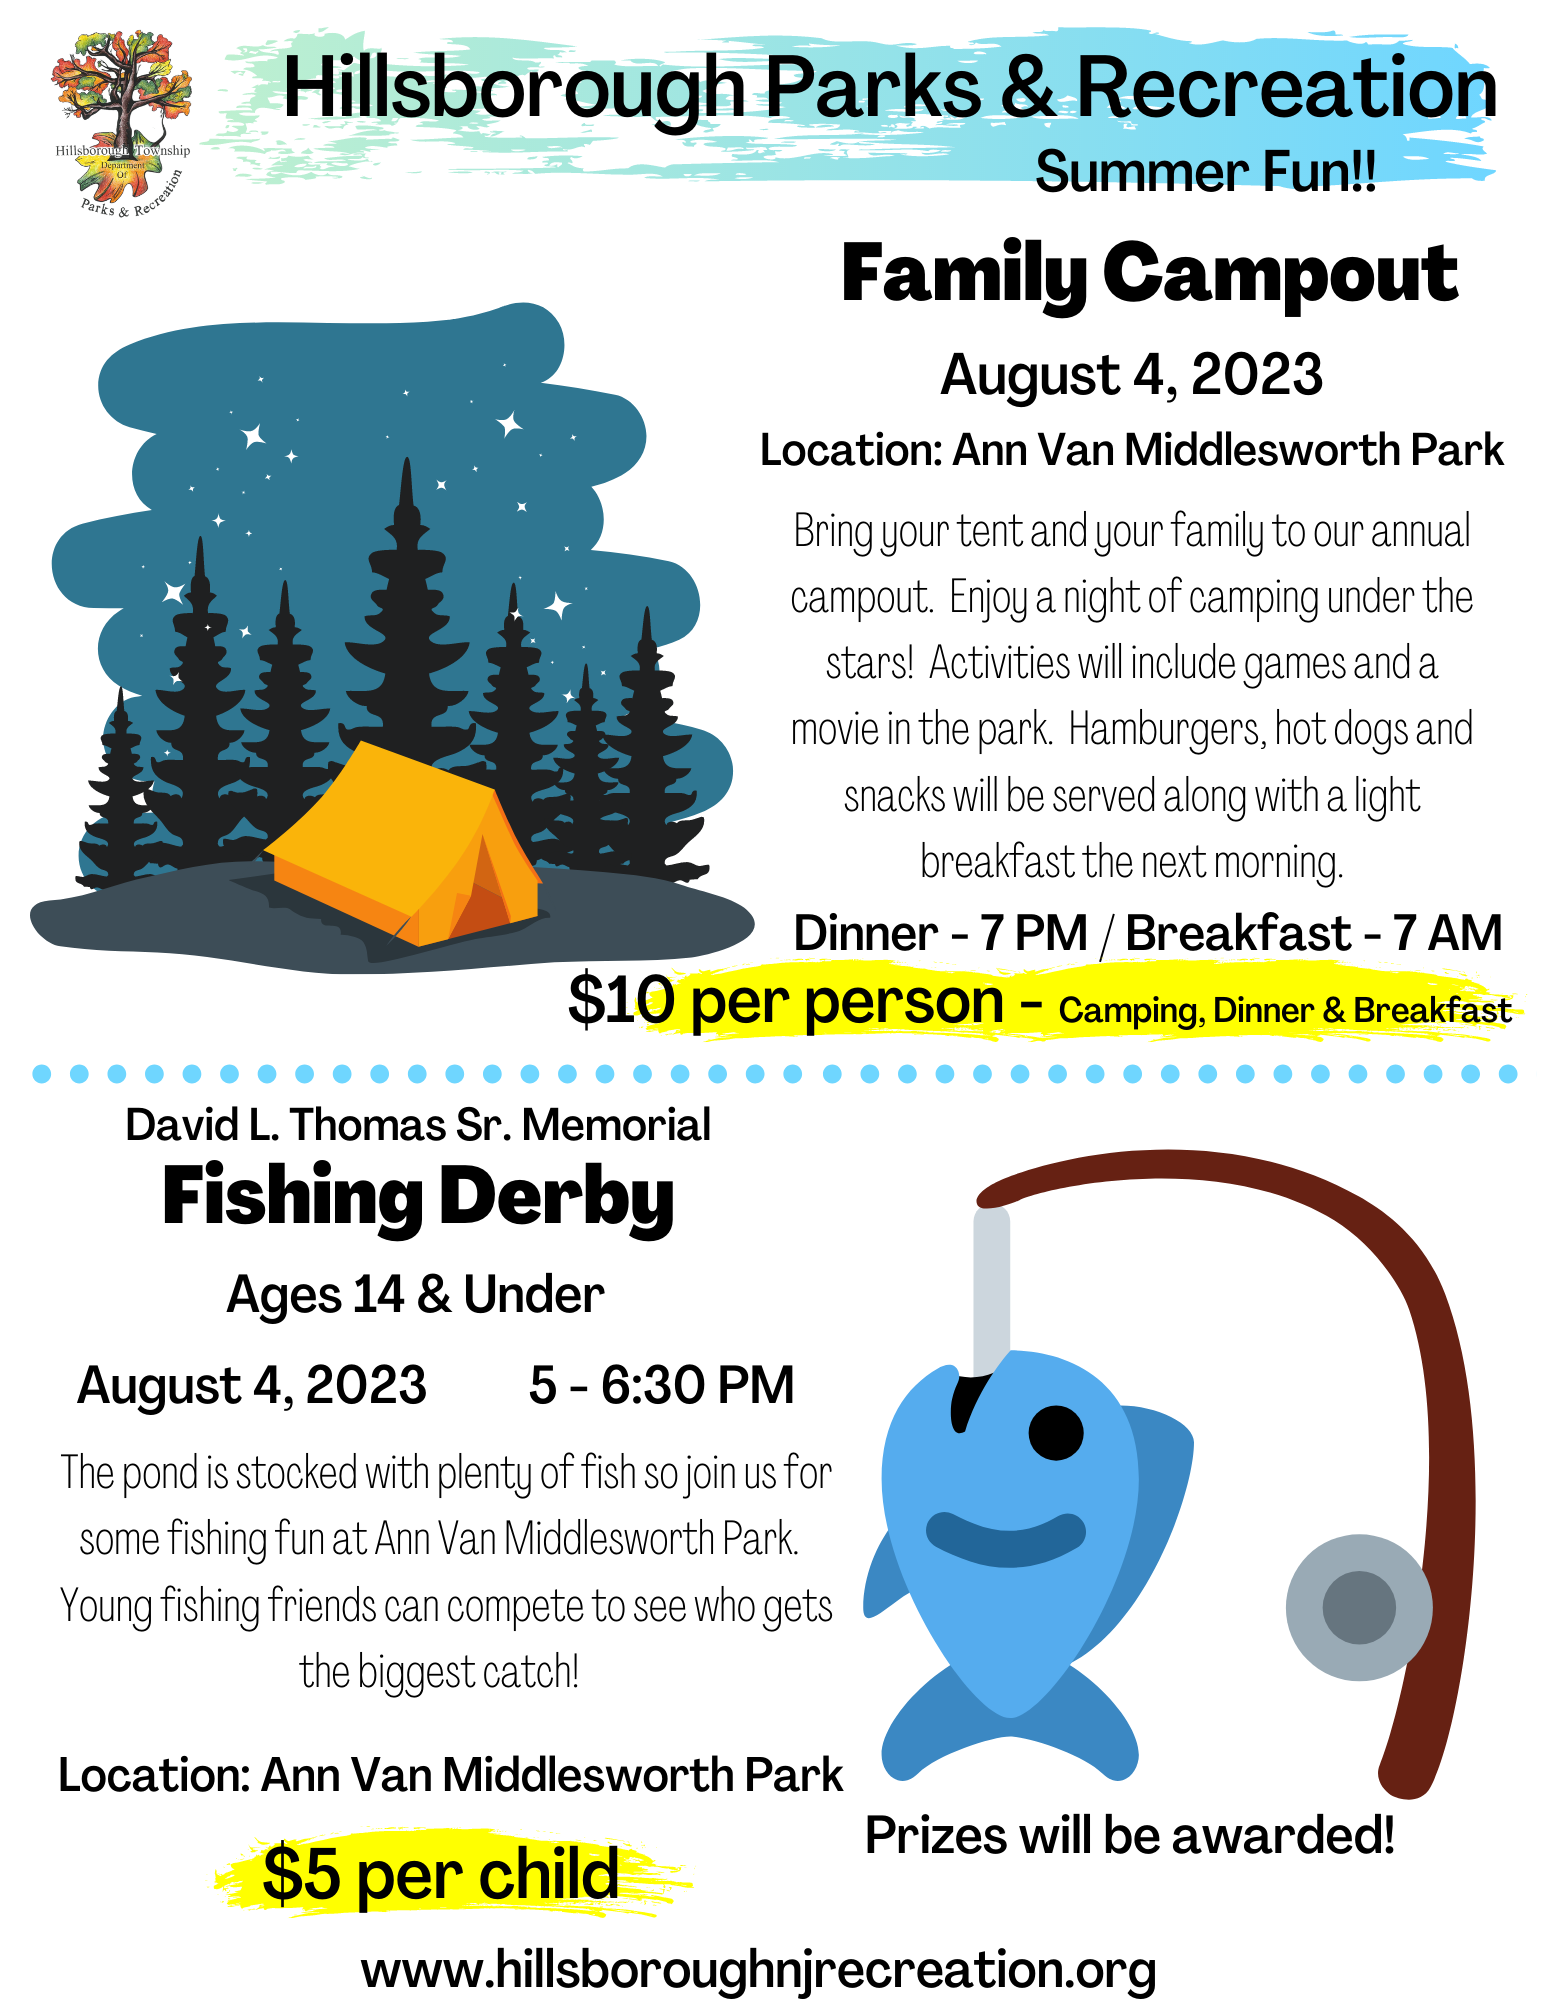 2023 Summer Family Campout Fishing Derby